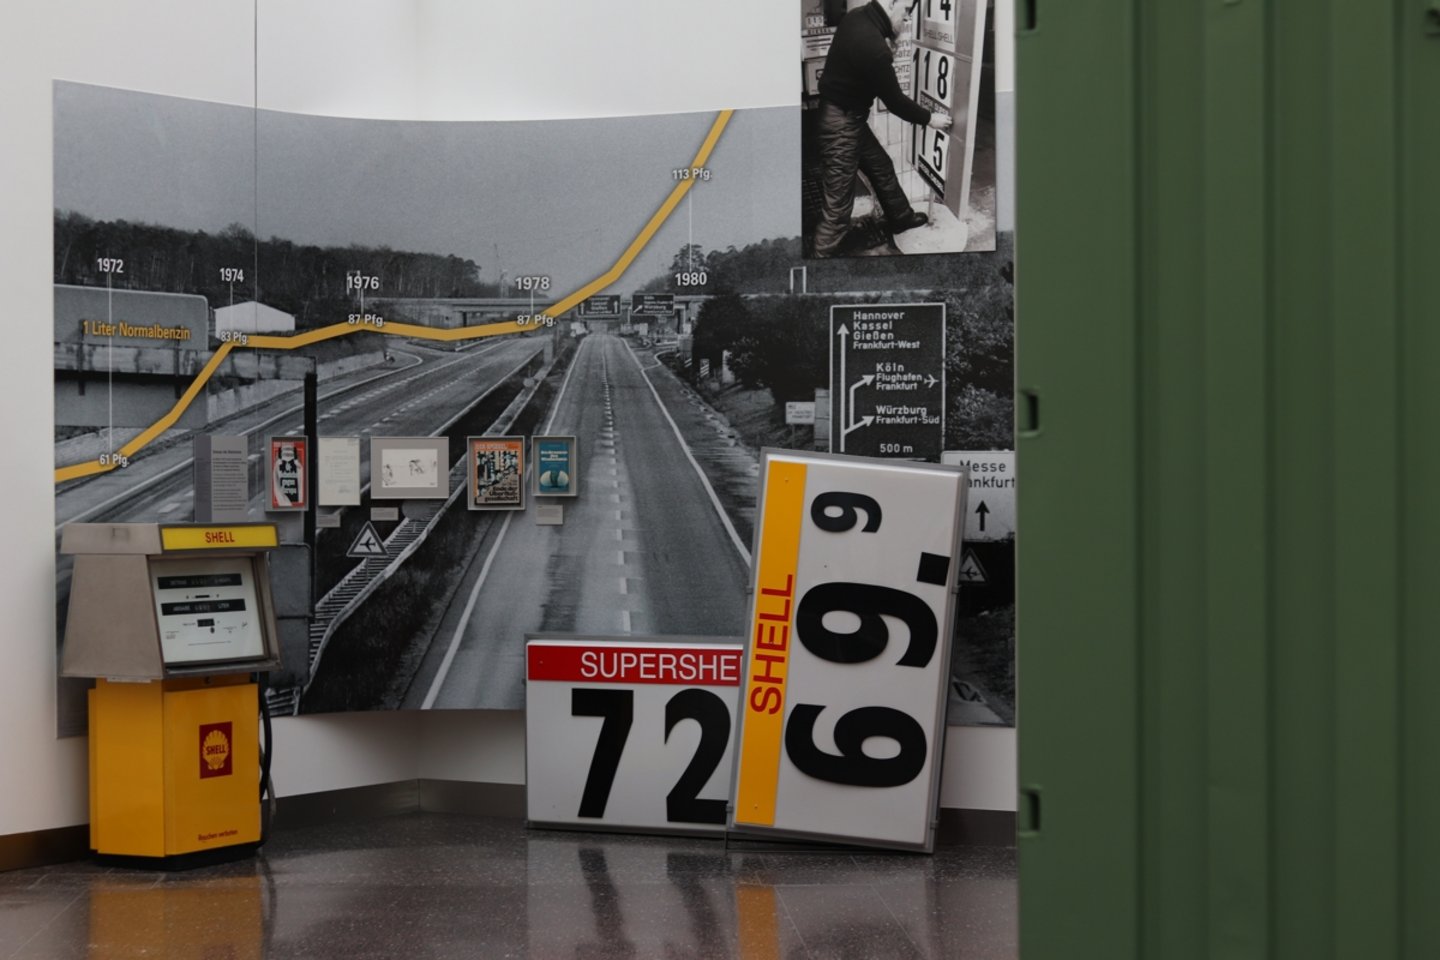 Part of the exhibition of the Haus der Geschichte about gas stations